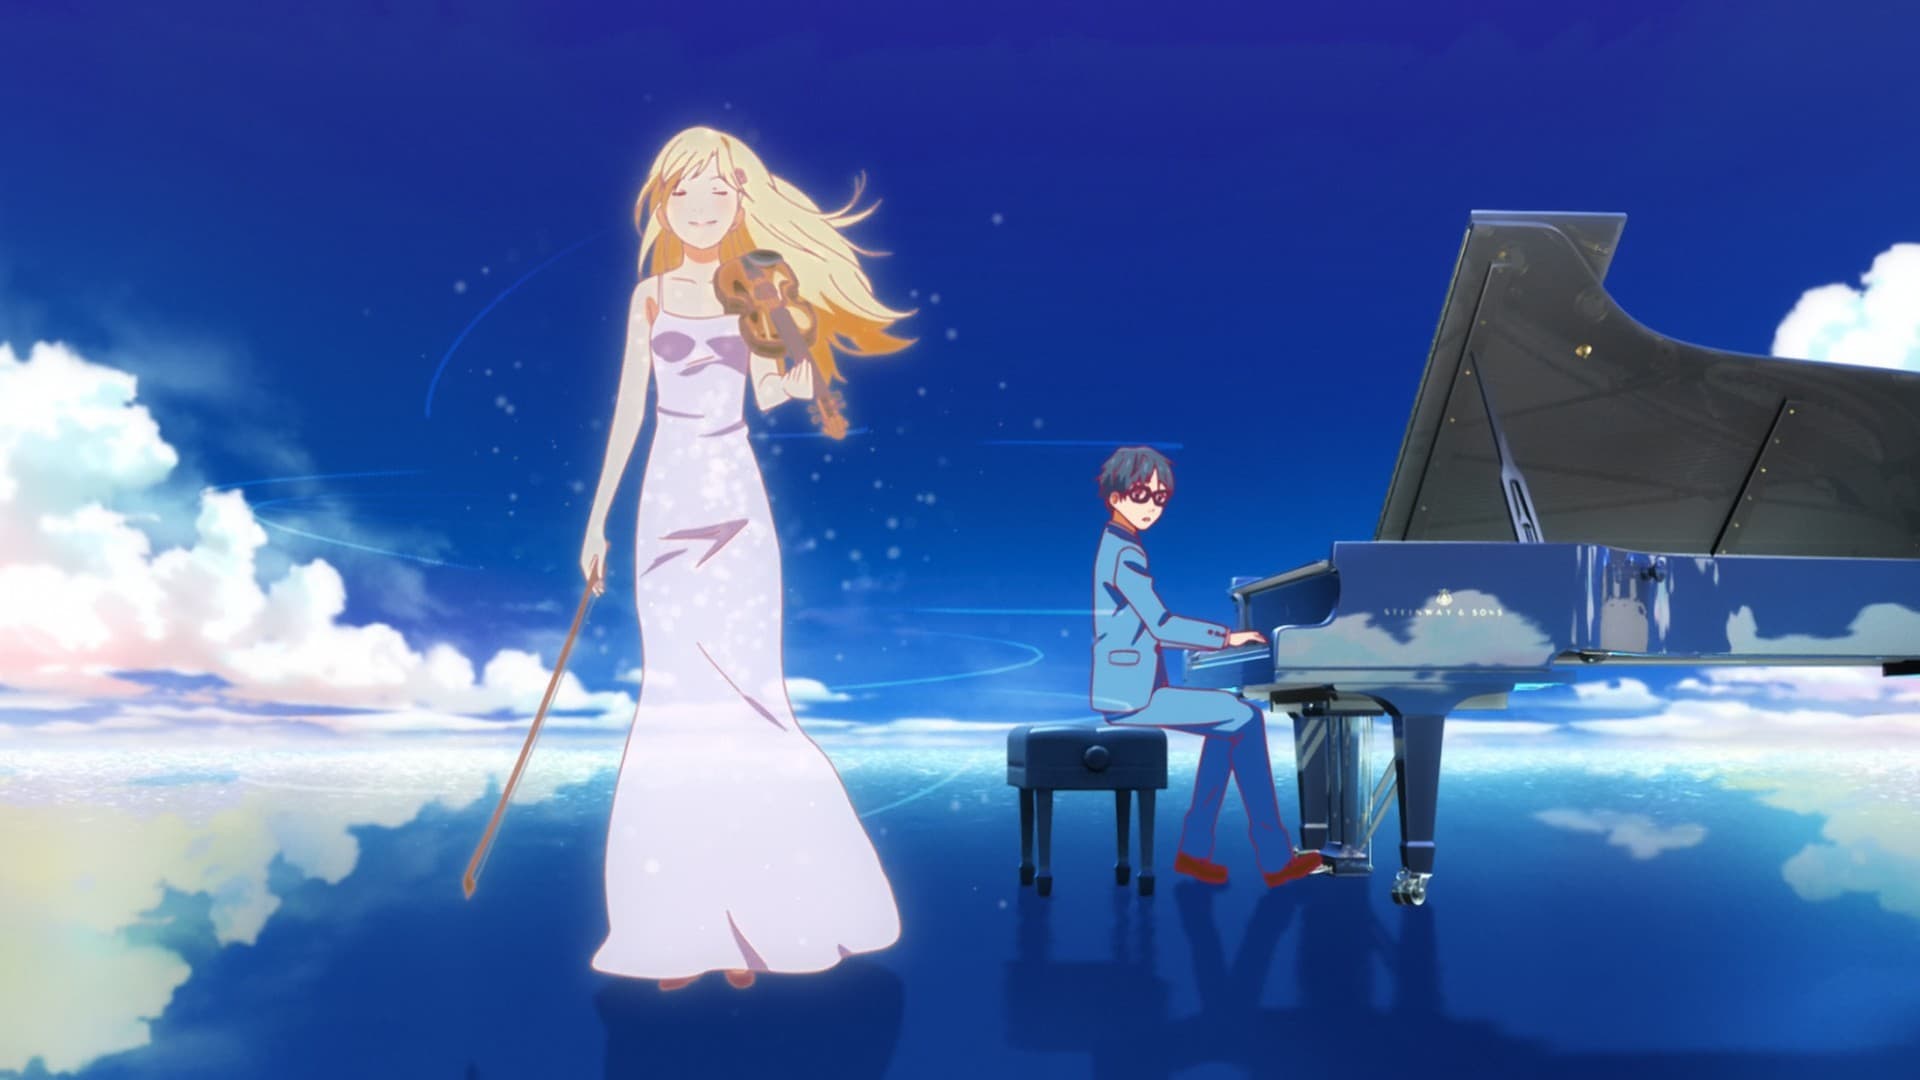 Your lie in april piano